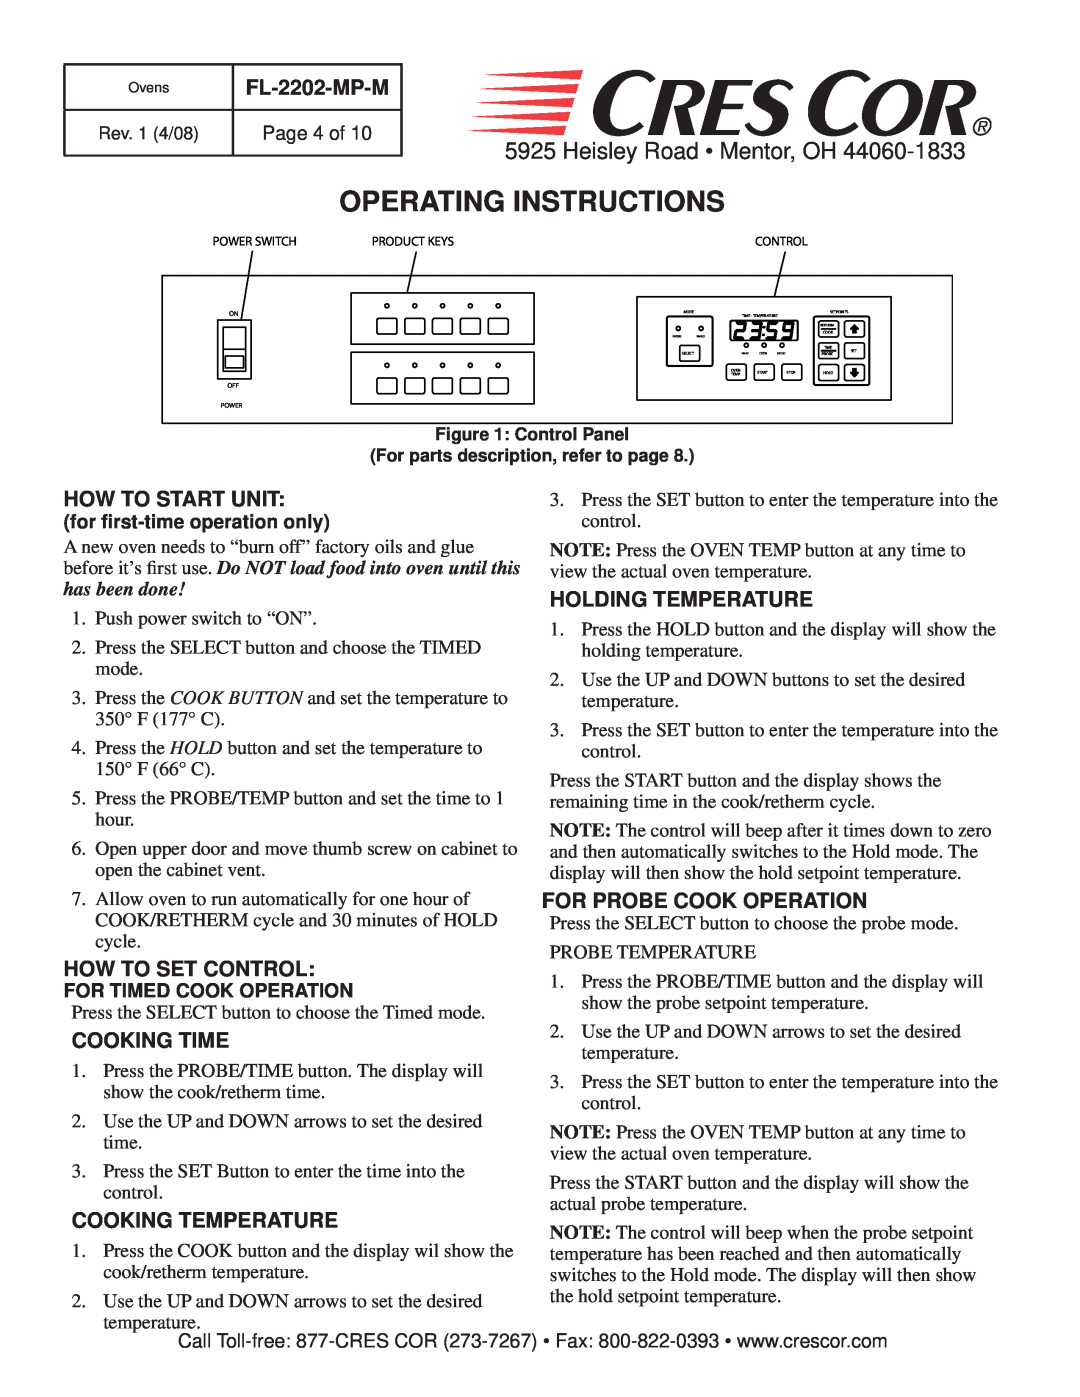 Cres Cor RO151FUA18 Operating Instructions, Heisley Road Mentor, OH, FL-2202-MP-M, How To Start Unit, How To Set Control 